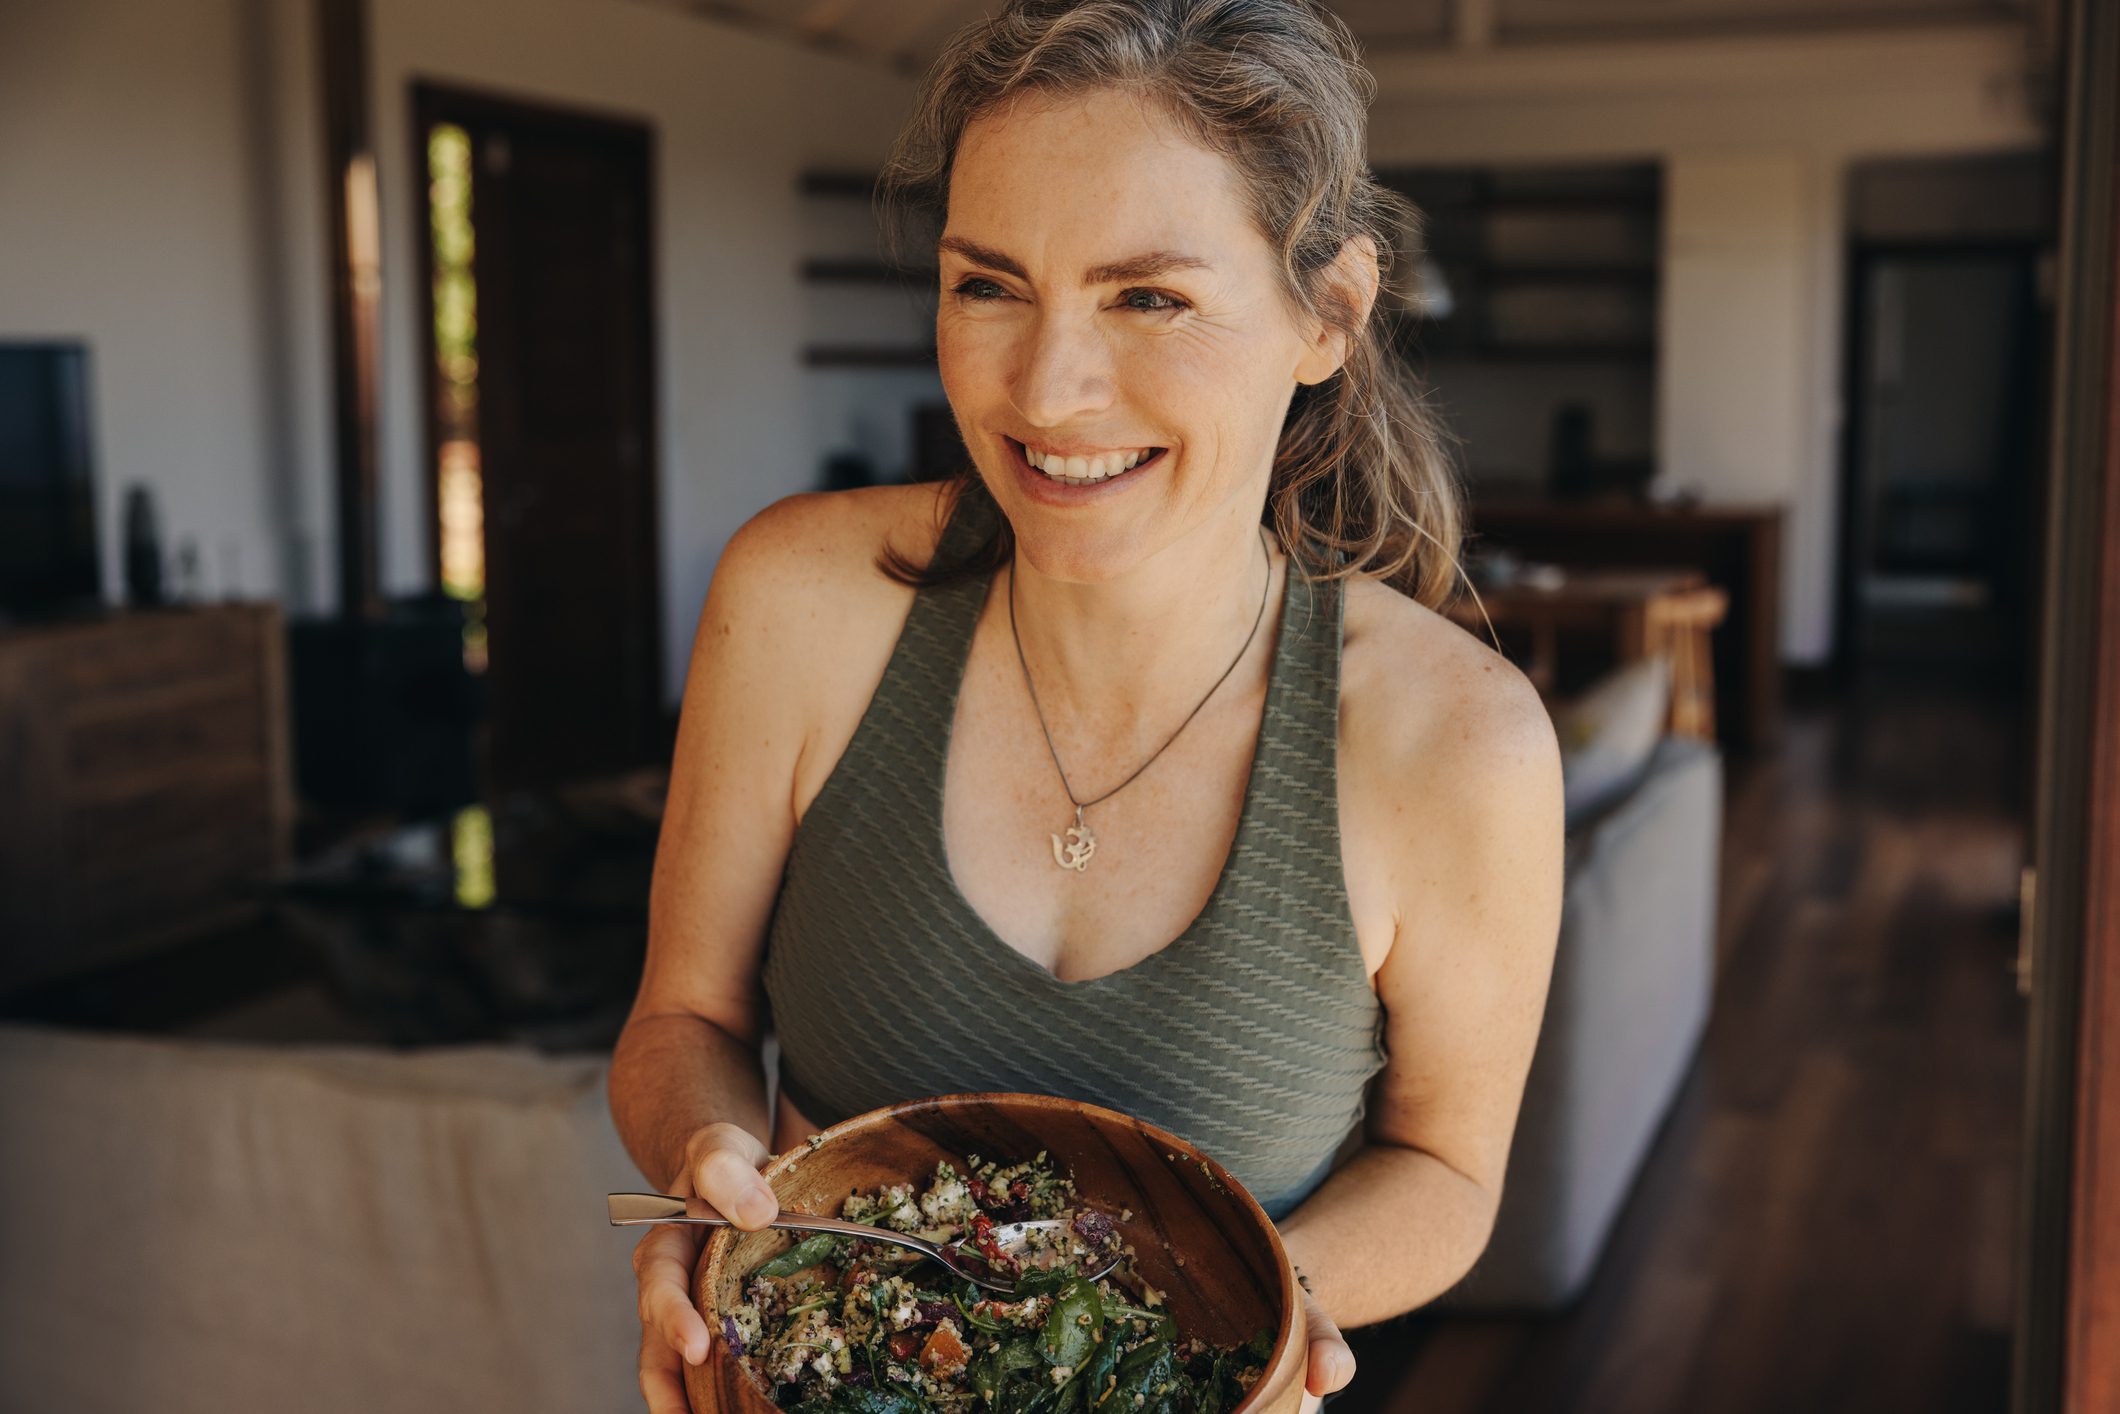 Smiling woman in a green tank top holding a wooden bowl filled with a fresh, healthy salad, standing in a cozy, well-lit home environment.